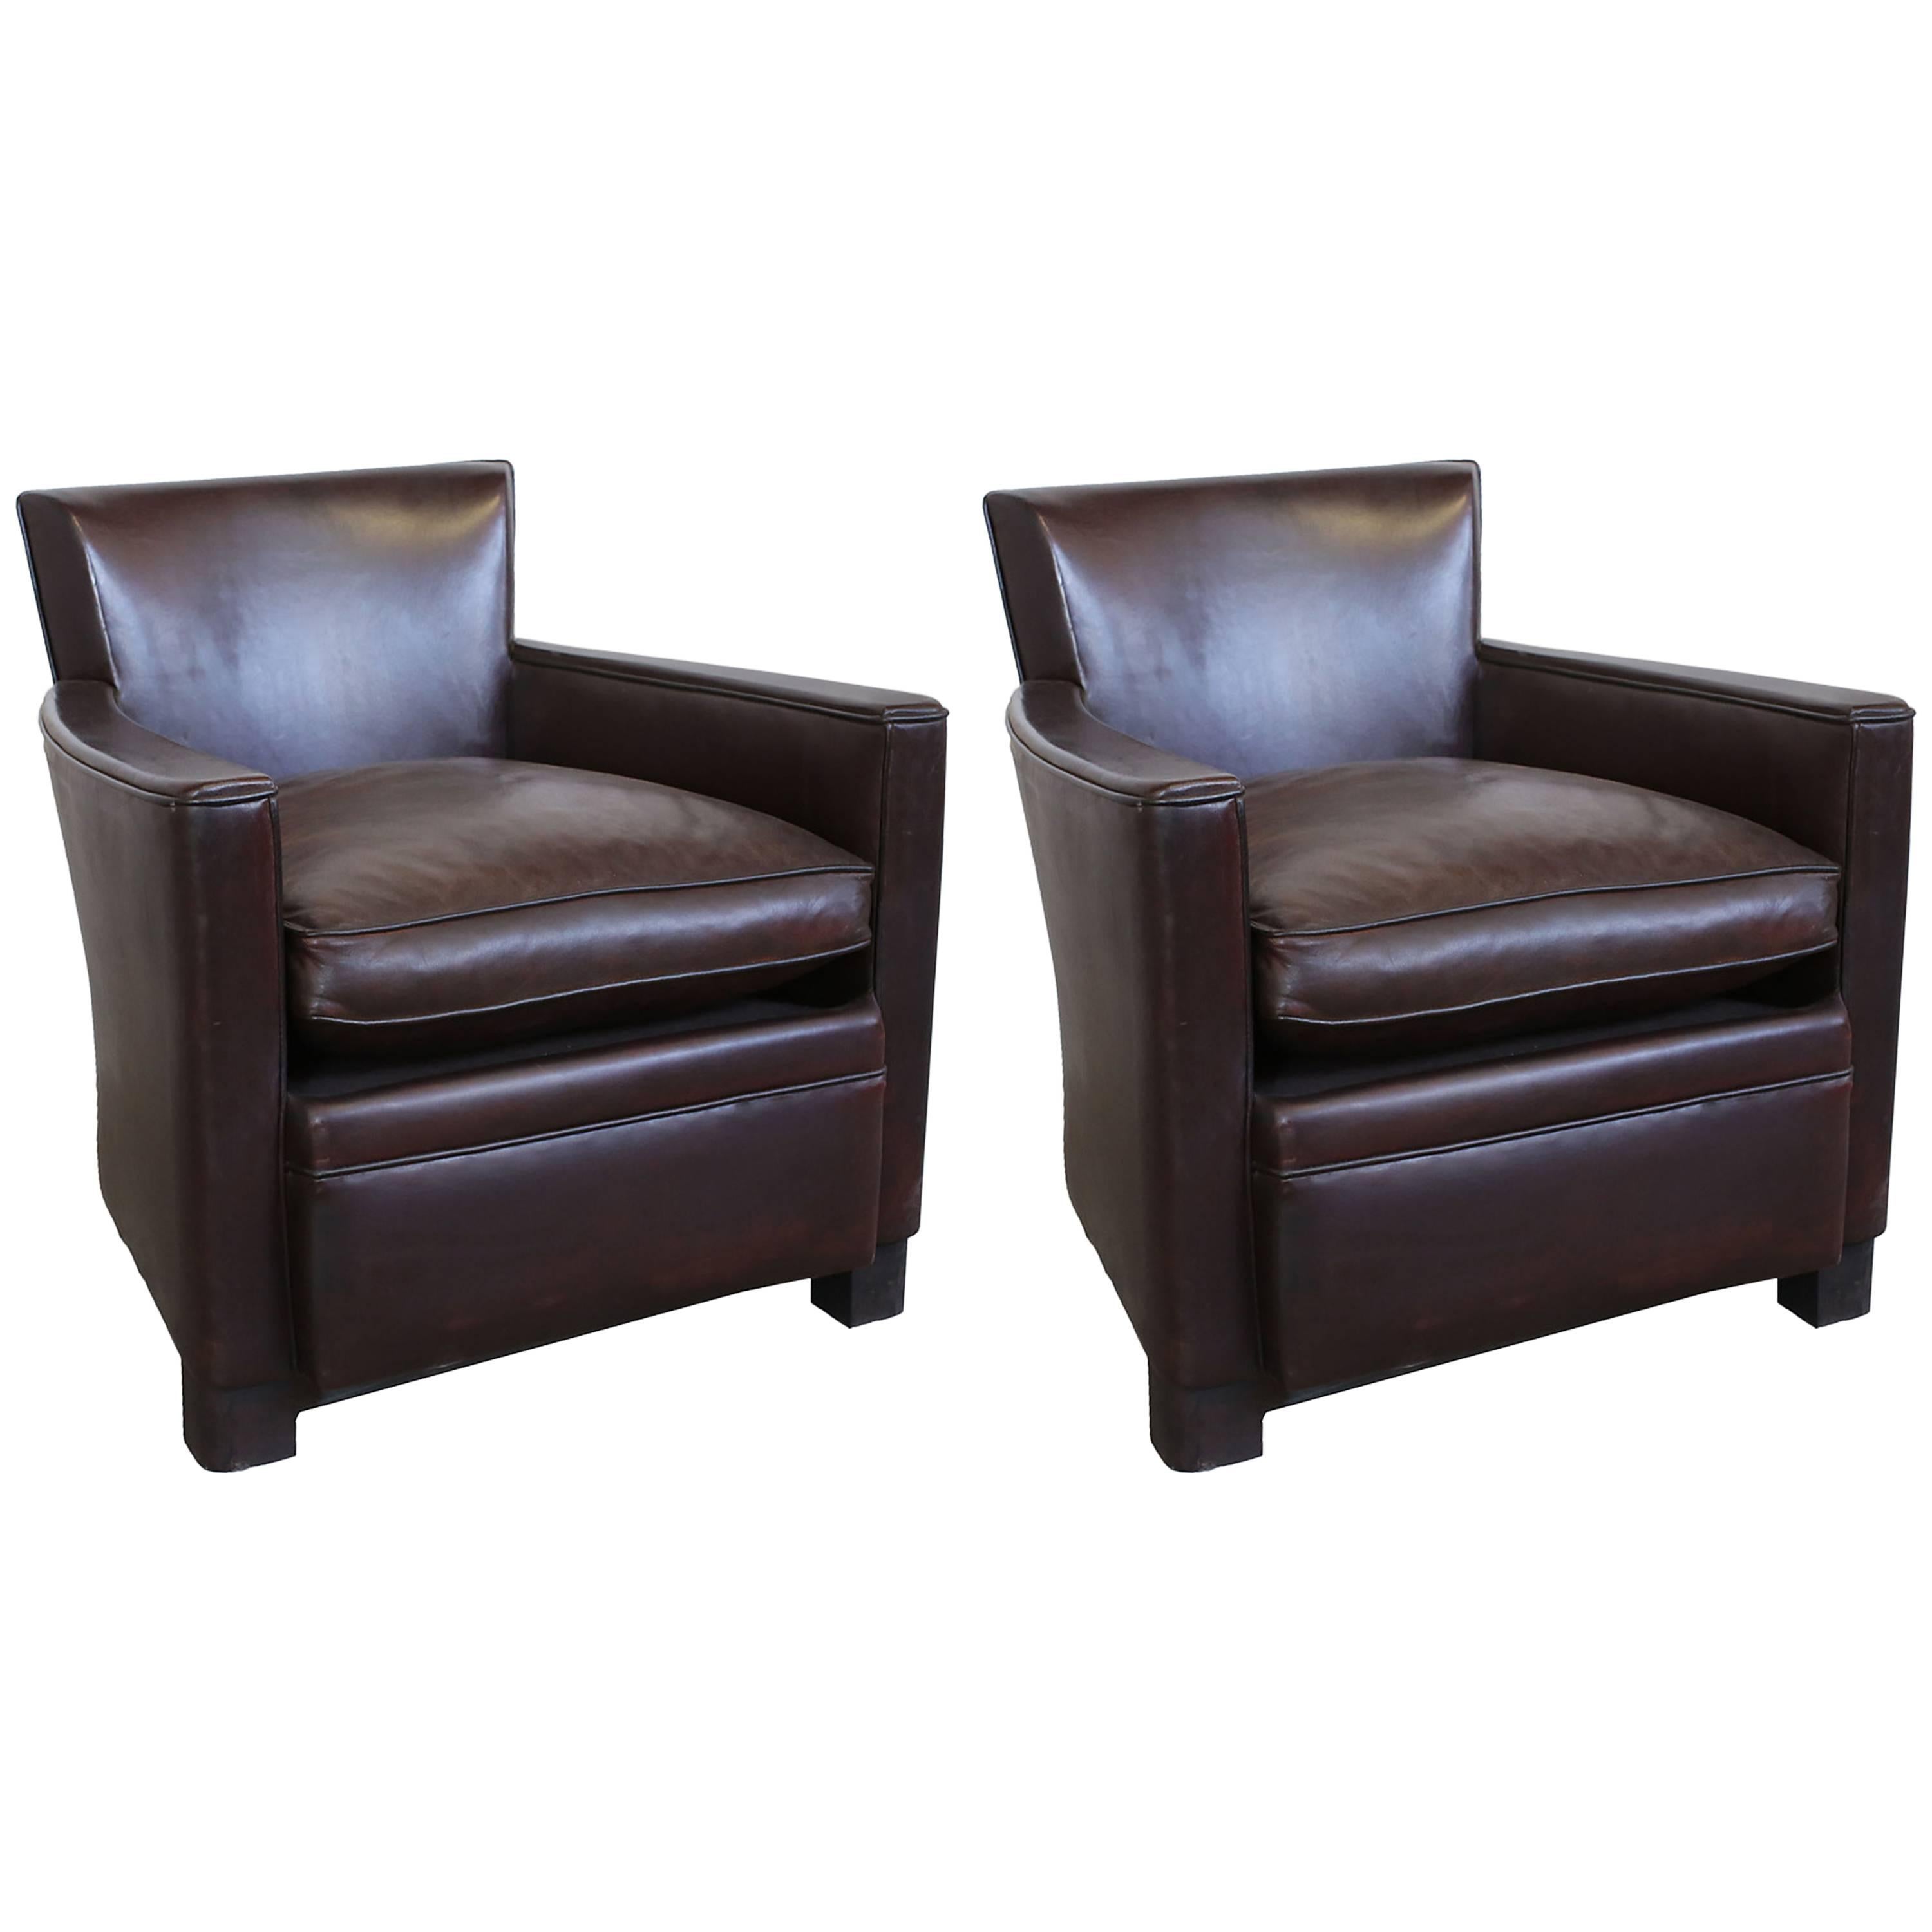 Pair of French Art Deco Leather Club Chairs, circa 1930s